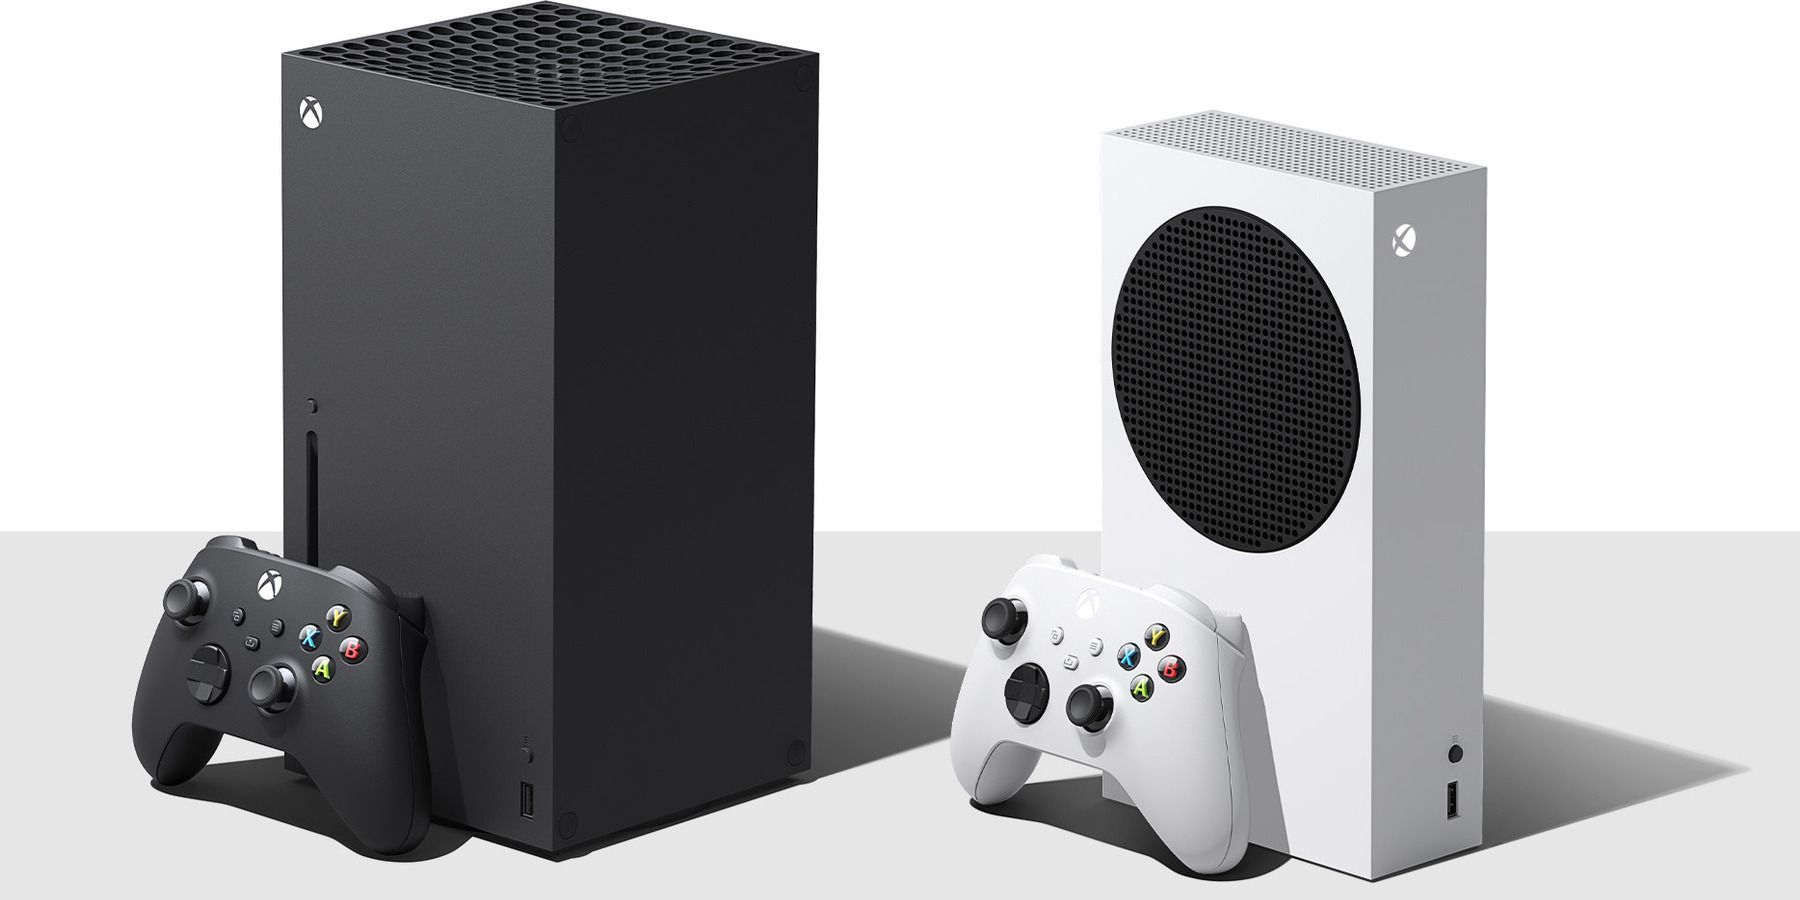 Xbox Series X and Series S expandable storage